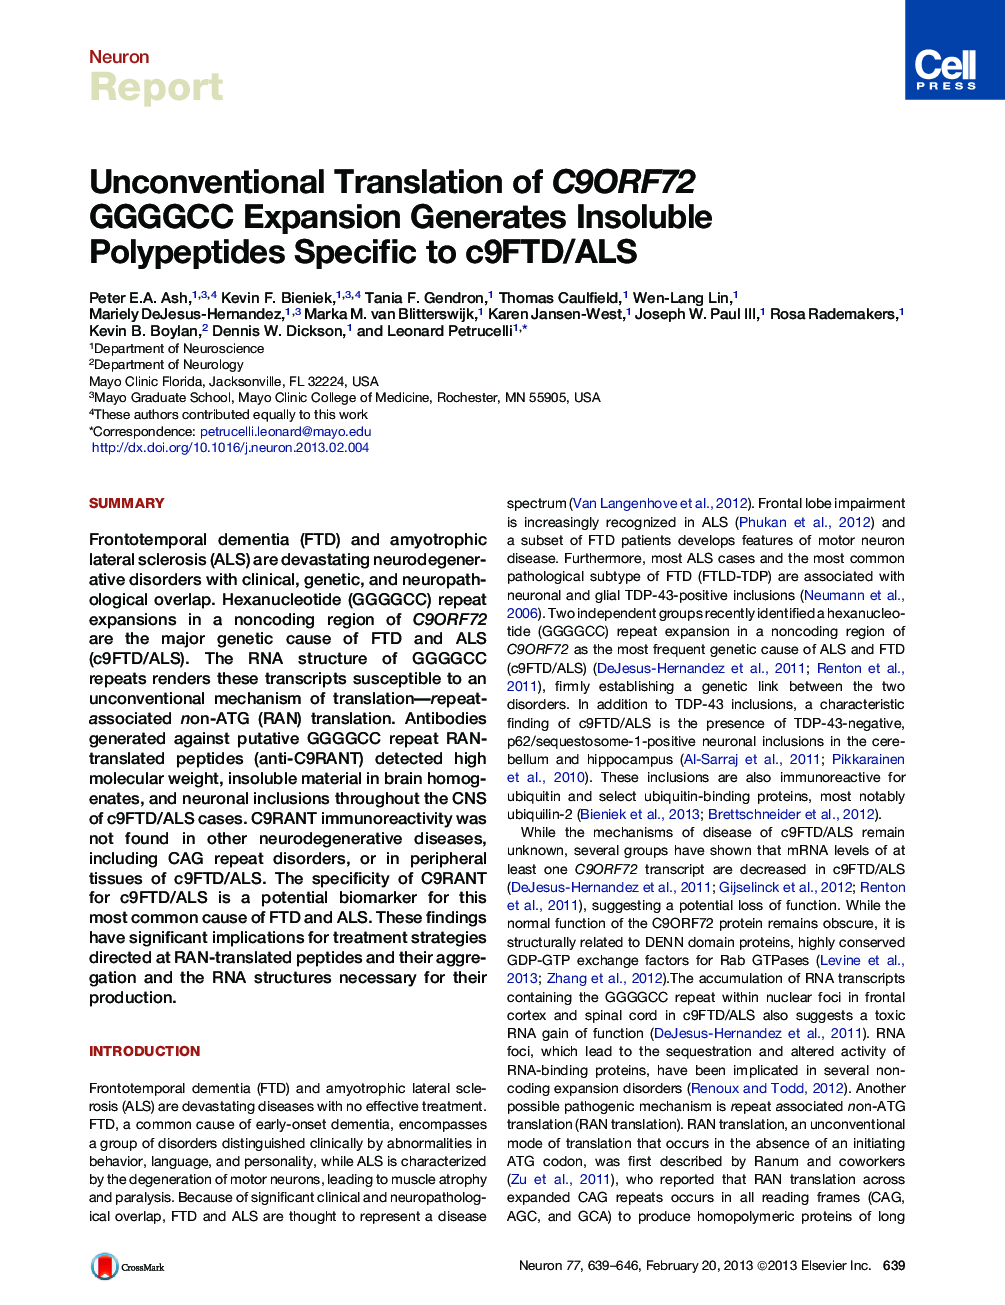 Unconventional Translation of C9ORF72 GGGGCC Expansion Generates Insoluble Polypeptides Specific to c9FTD/ALS